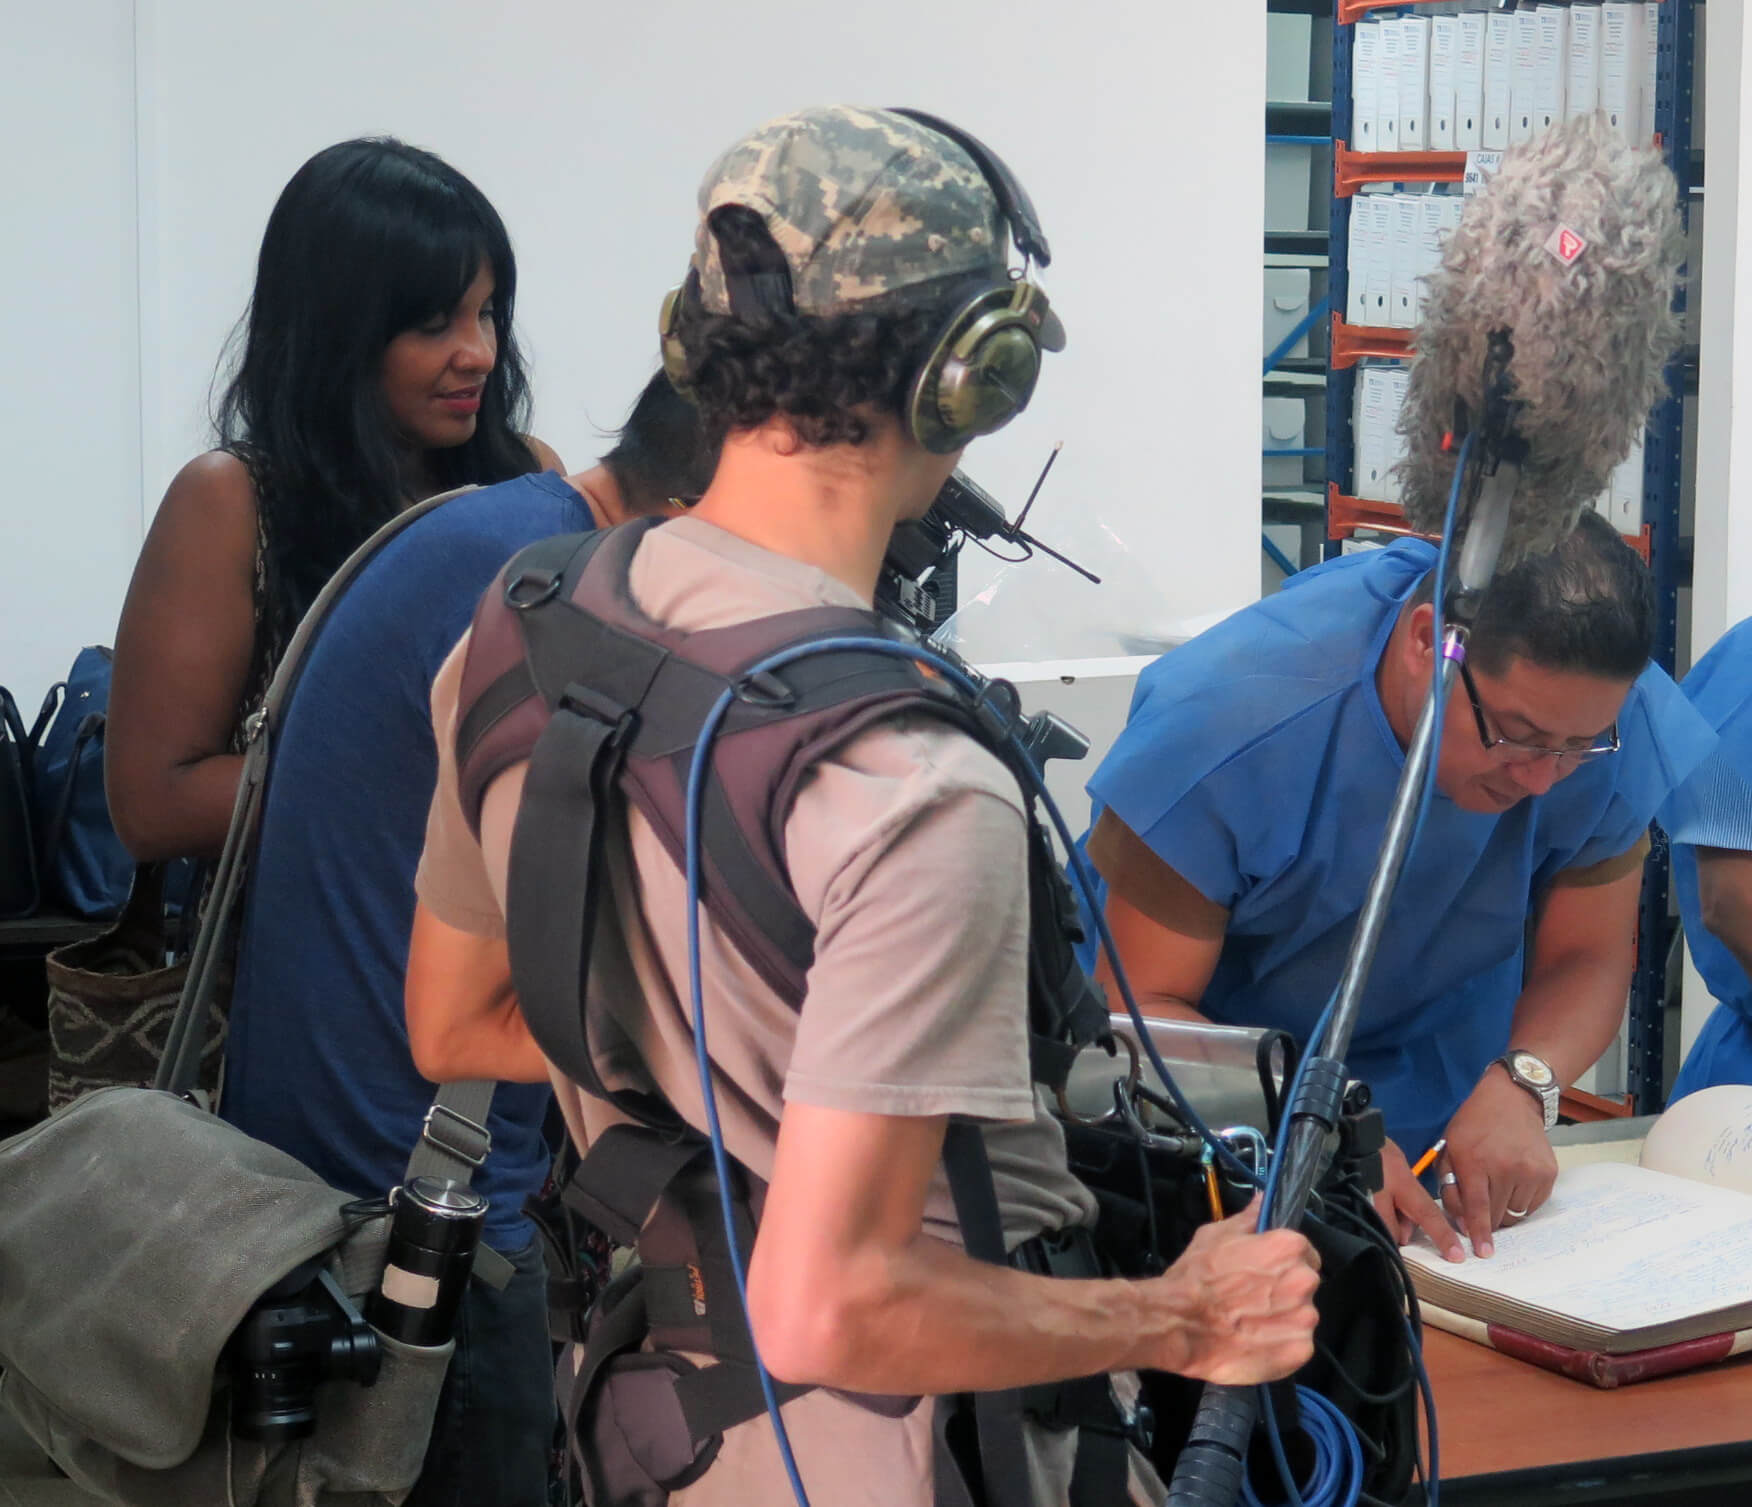 A man with glasses and in a blue uniform leans into a large book that's on a desk while surrounded by a crew of (camera man and sound man) filming him flipping through the book. A woman with dark skin and dark hair stands next to the crew and behind the man they are filming giving directions.